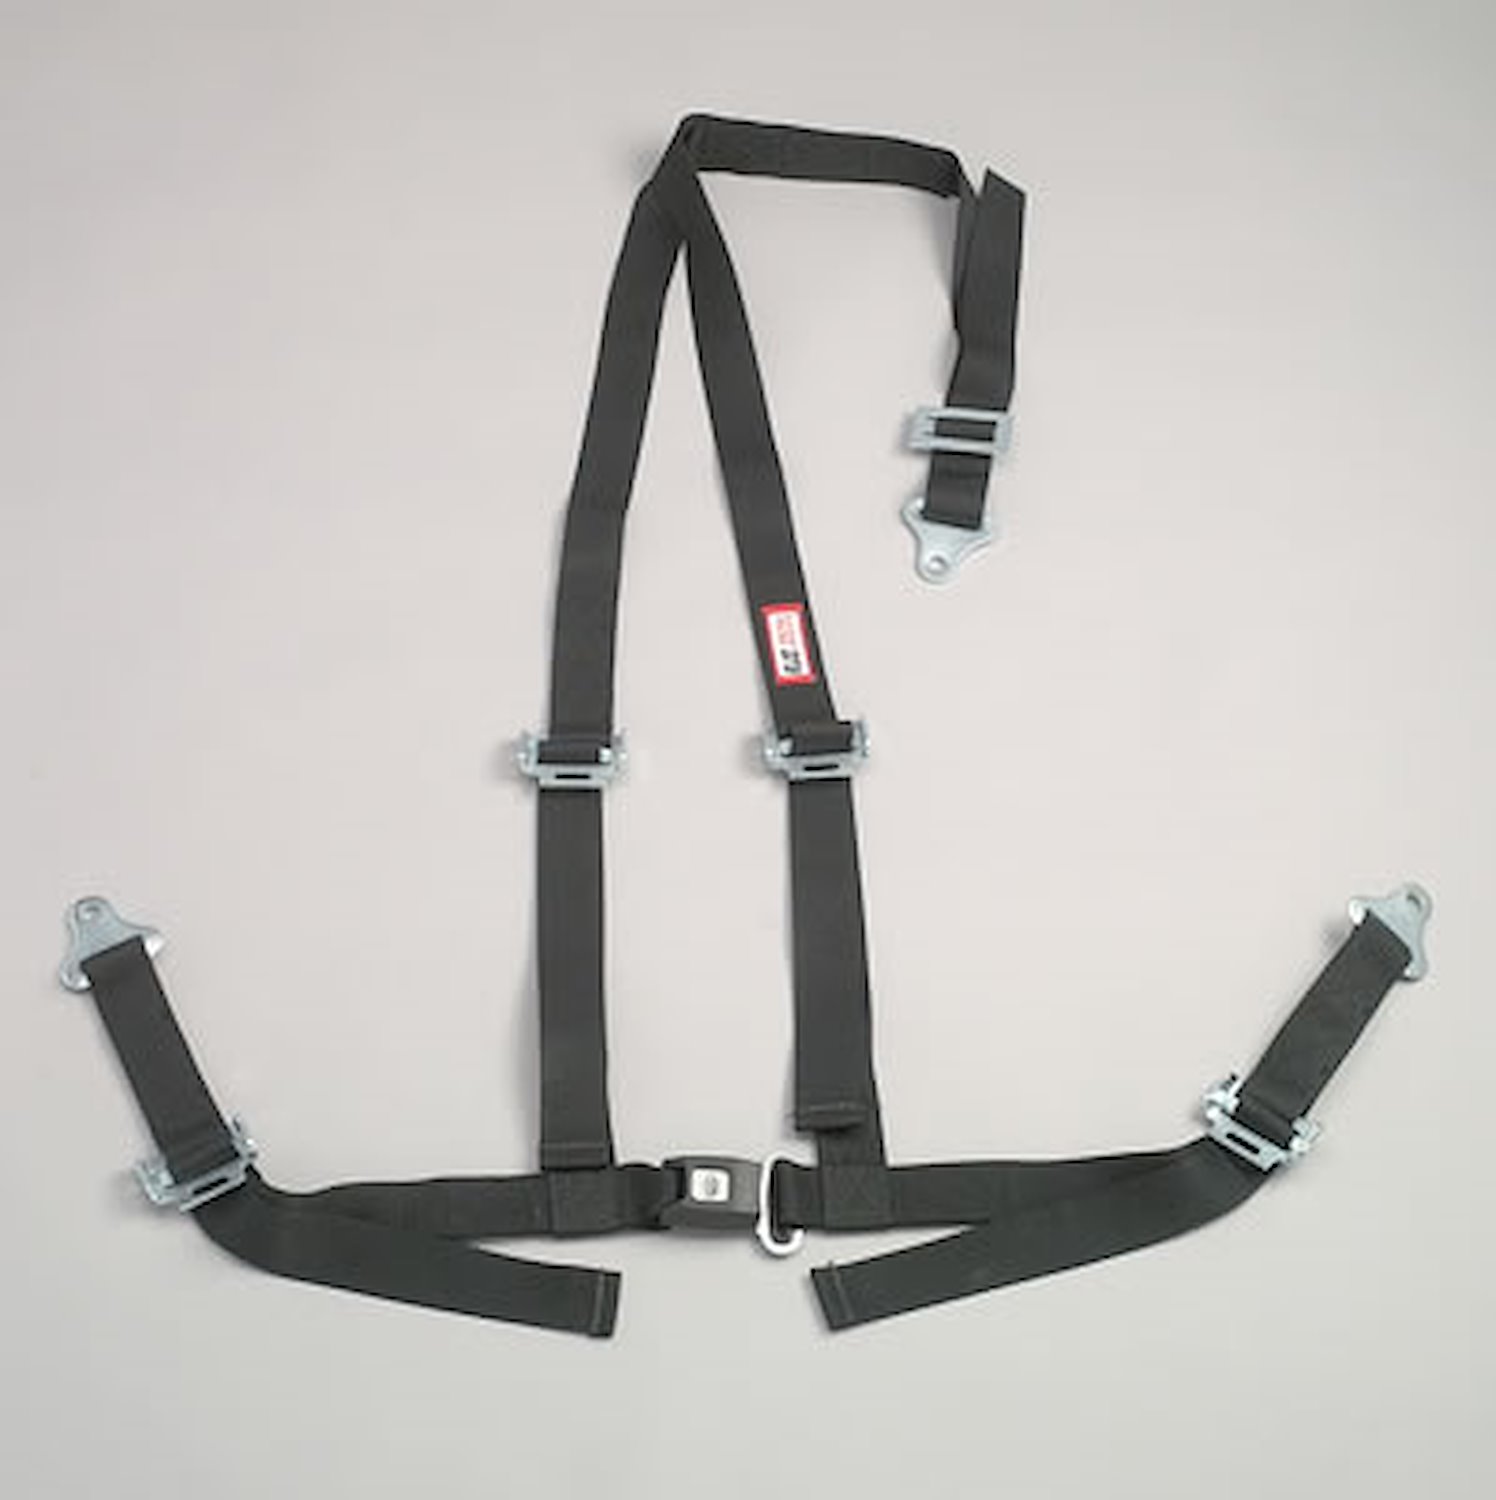 NON-SFI B&T HARNESS 2 PULL DOWN Lap Belt 2 S. H. Individual ROLL BAR Mount ALL WRAP ENDS ORANGE